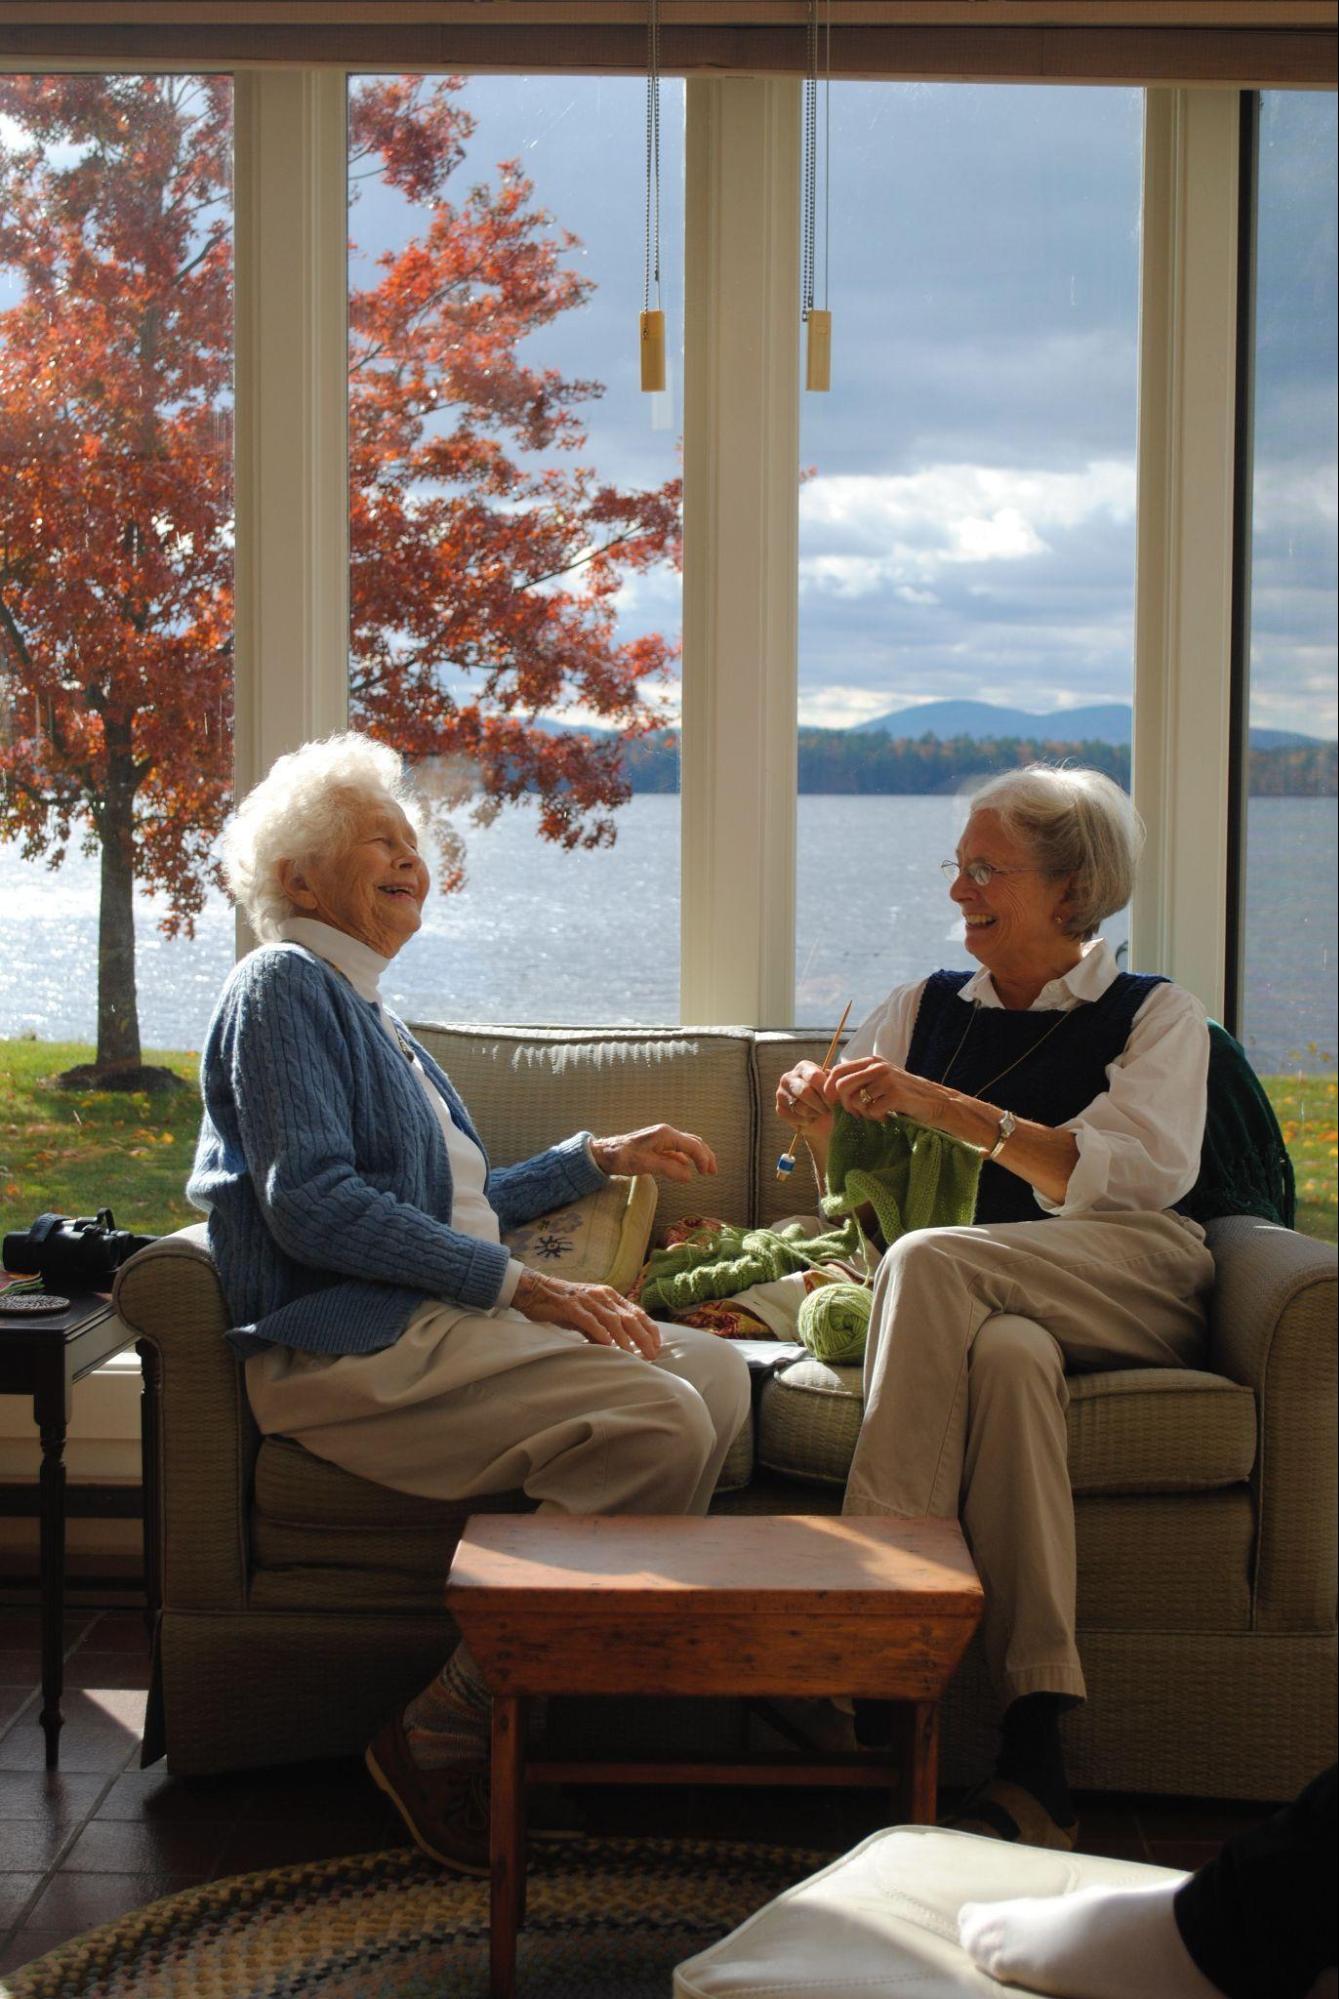 How To Improve Nursing Homes & Lower Costs